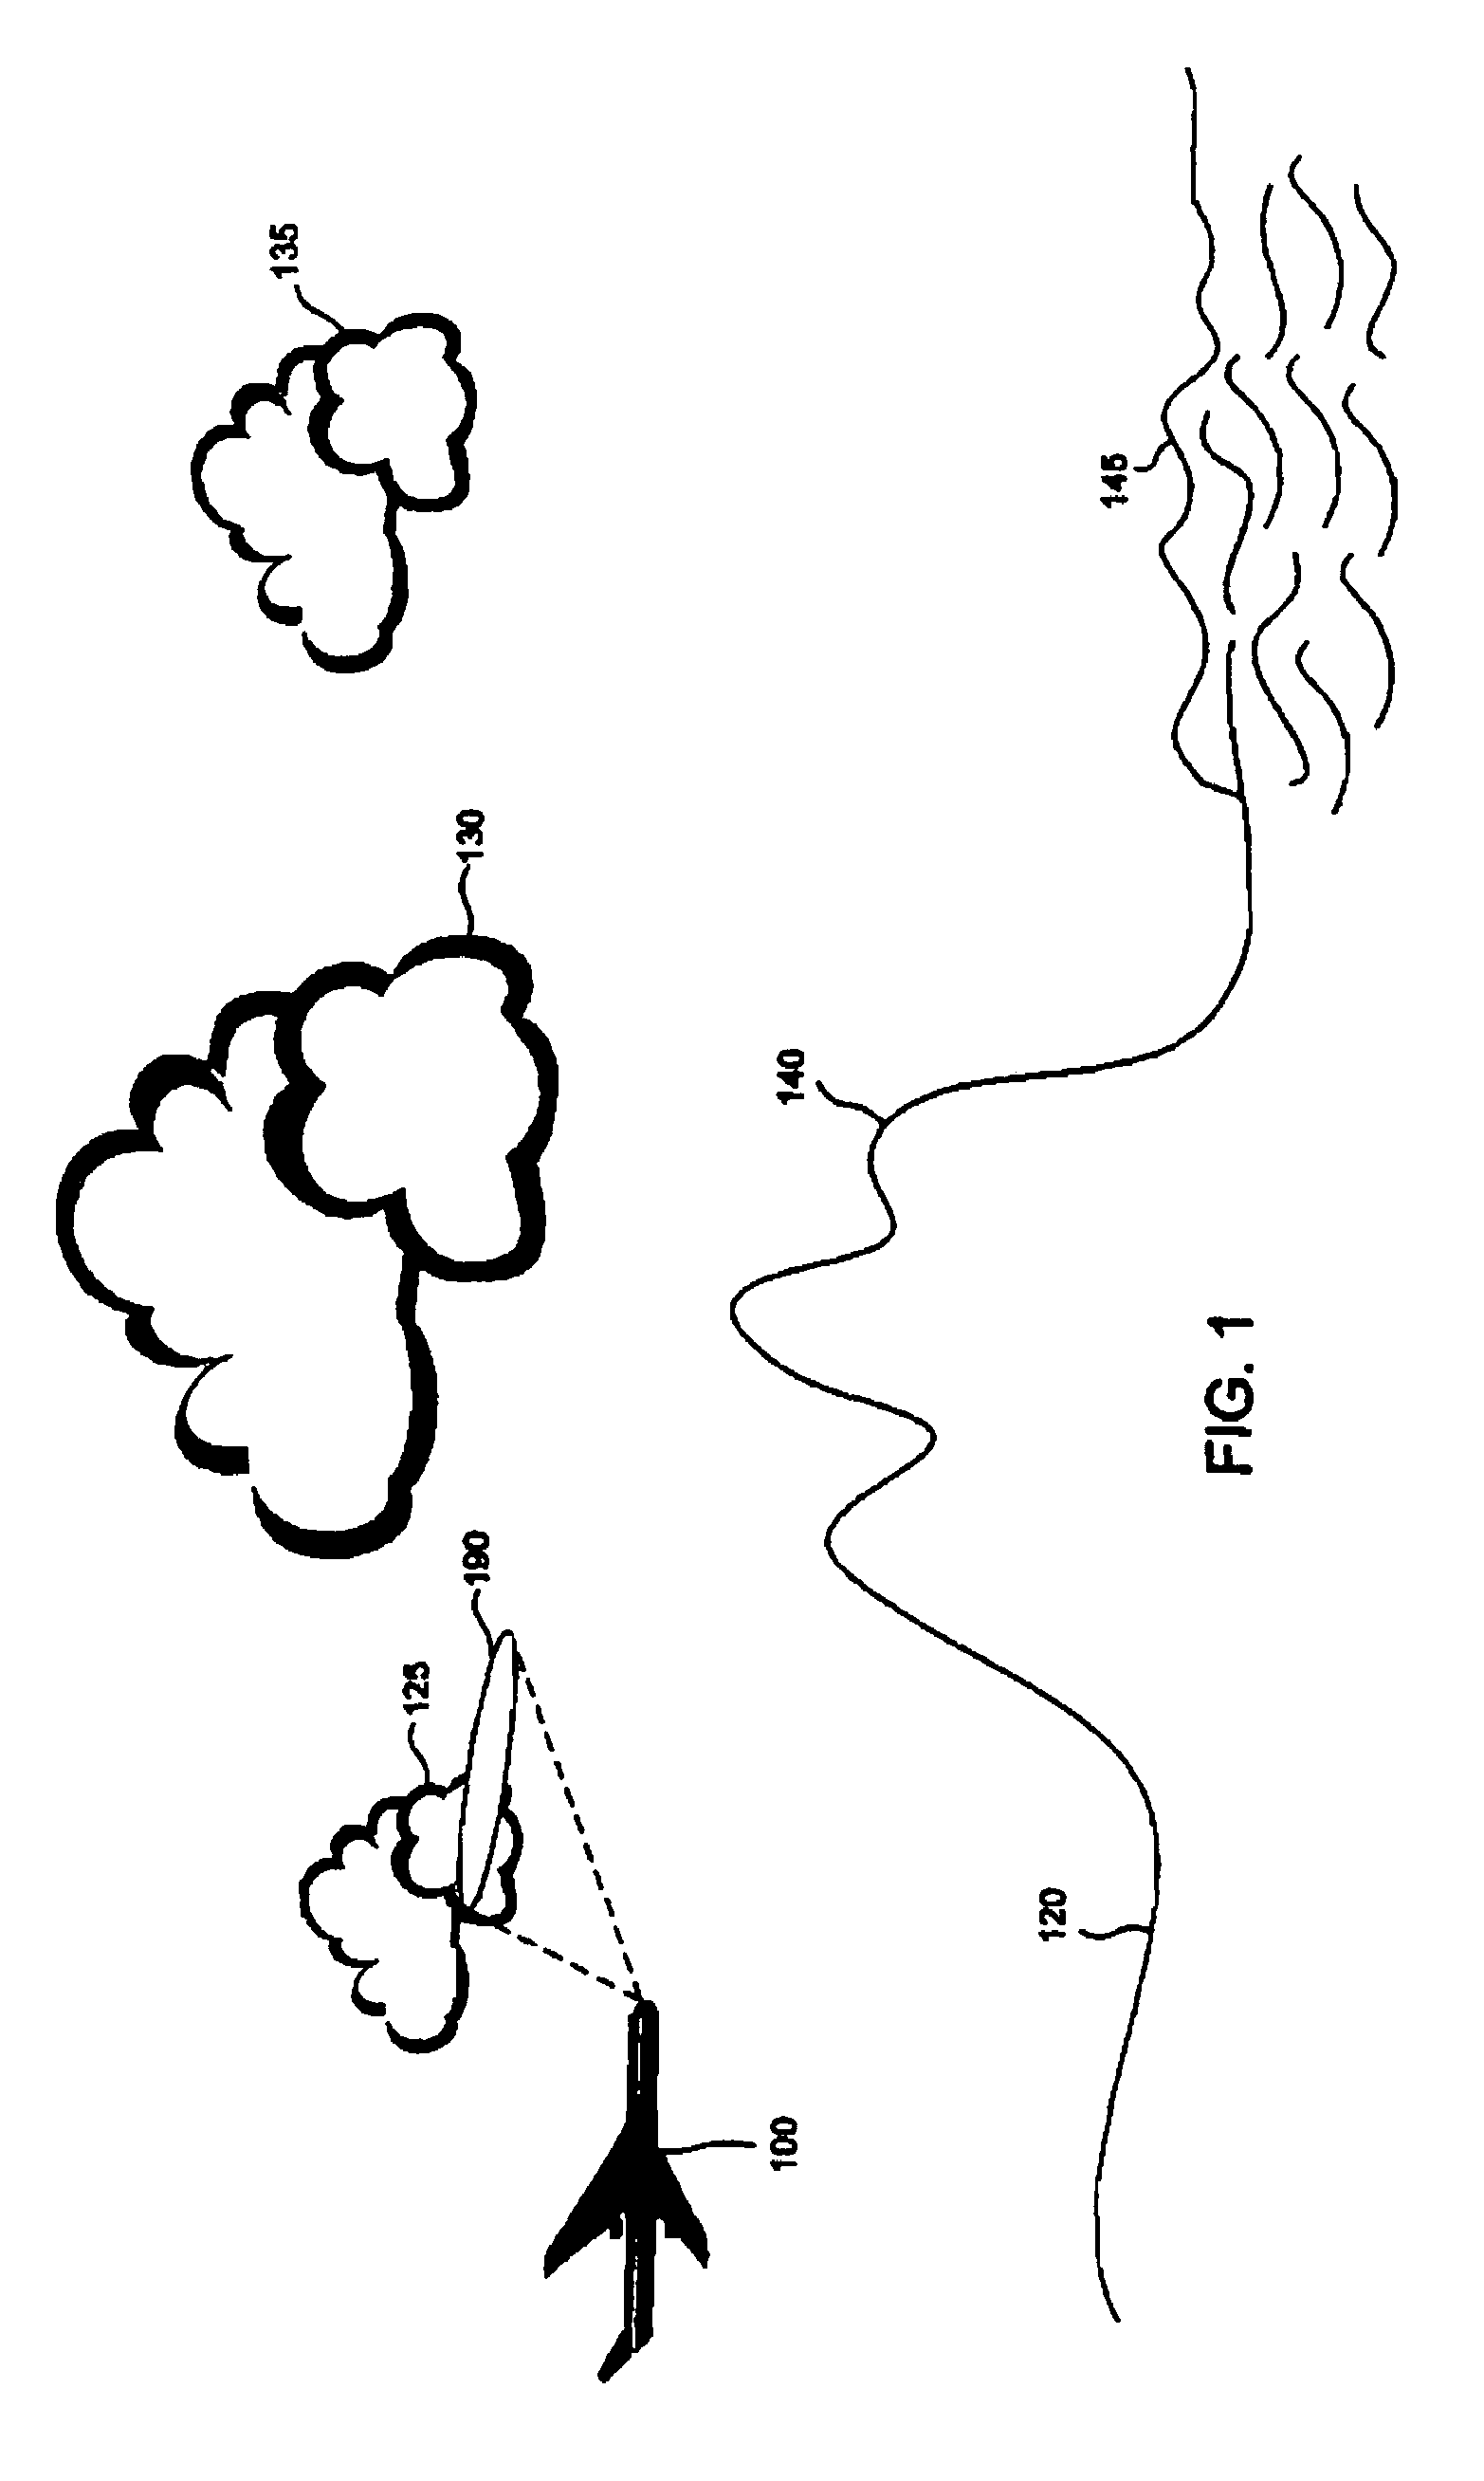 Adaptive weather radar detection system and method